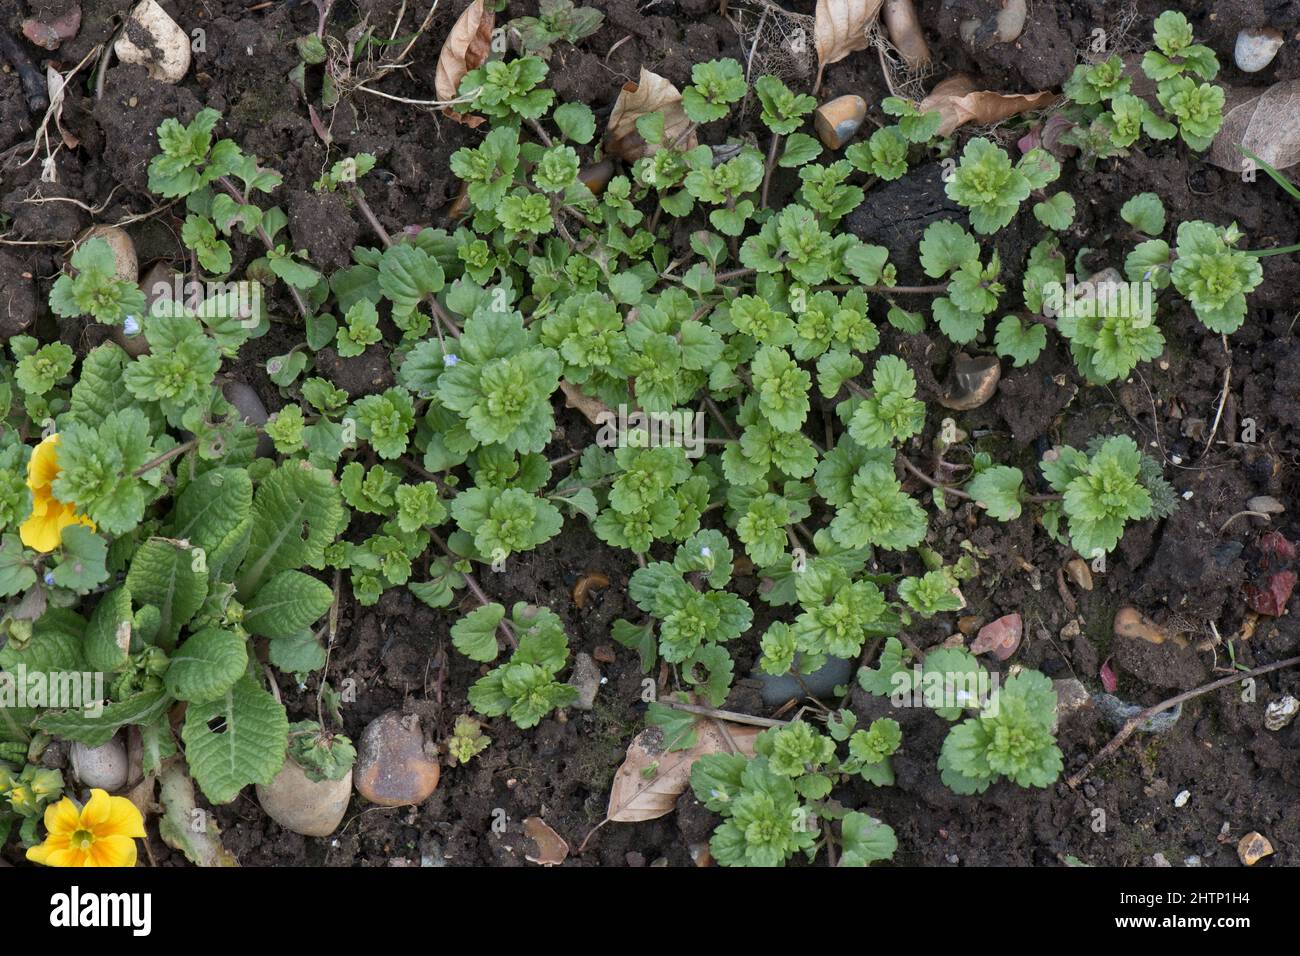 Common field speedwell (Veronica persica) speading weed just beginning to flower in a garden bed, Berkshire, March Stock Photo